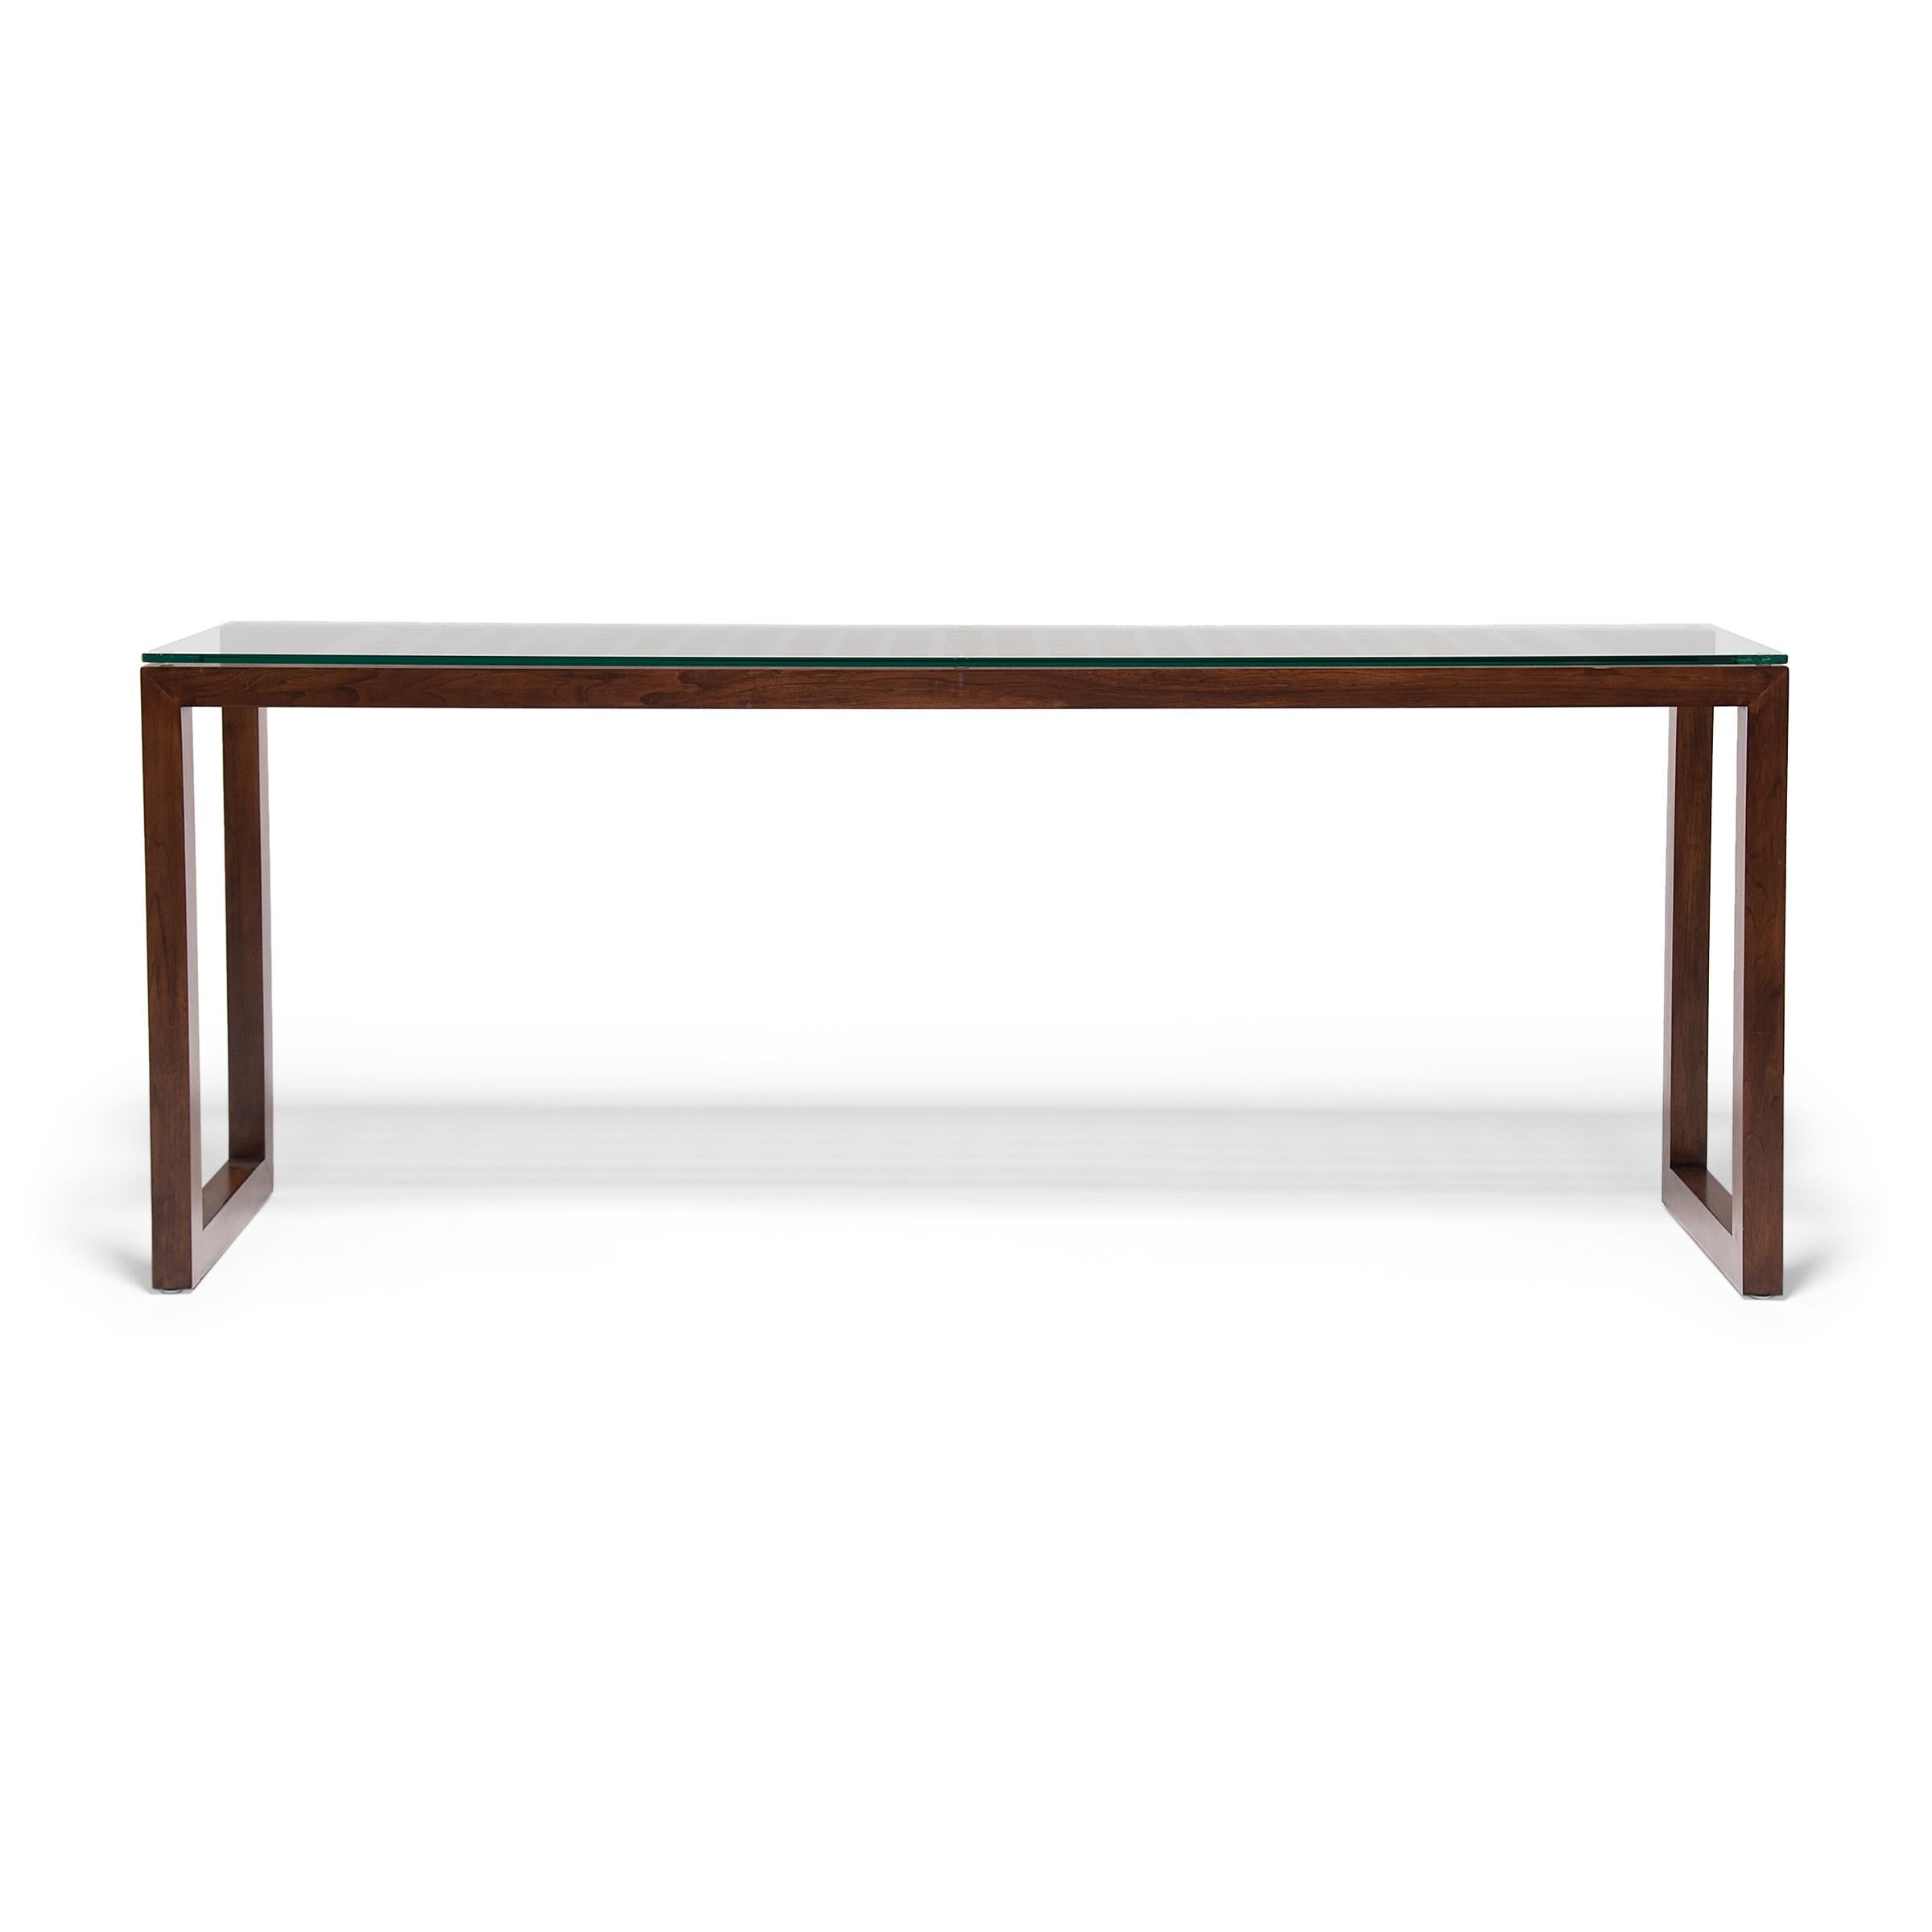 The clean lines of this contemporary console table remind us of the minimalist restraint of Ming-dynasty furniture design. The waterfall table has a balanced form, with square corners, open sides, and straight legs linked by a simple stretcher. The